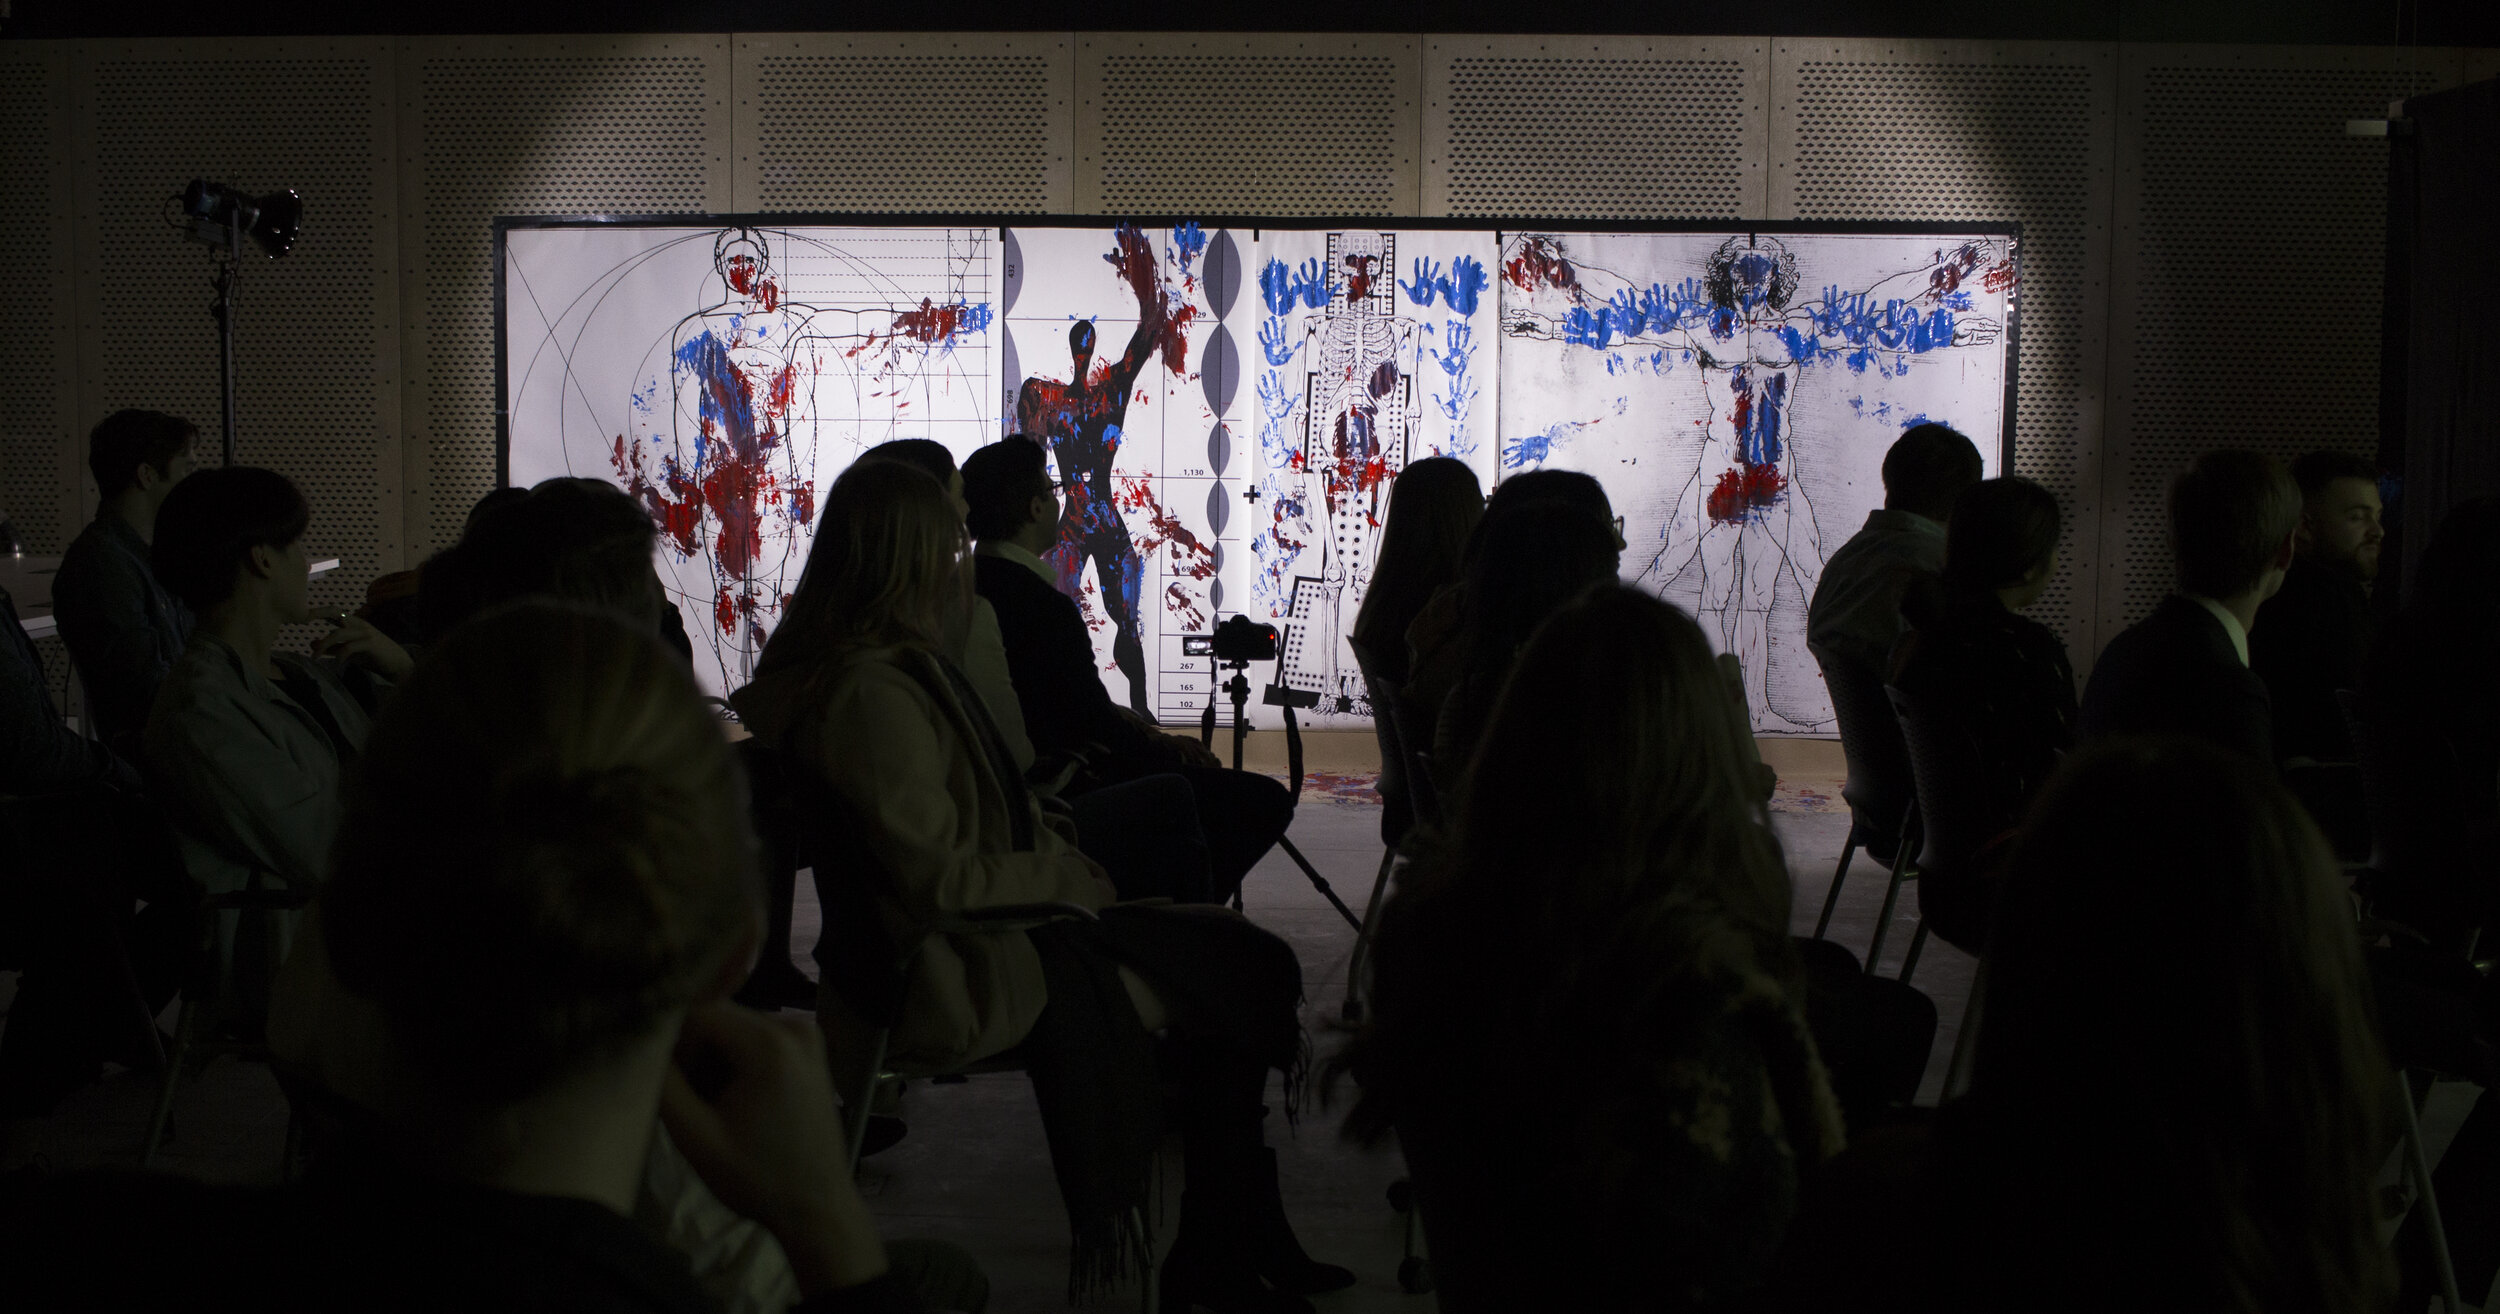  Once the performance is complete and the authors have exited the room, the audience is left to engage with and consider the inscribed installation. Photograph by Braeden Martel 